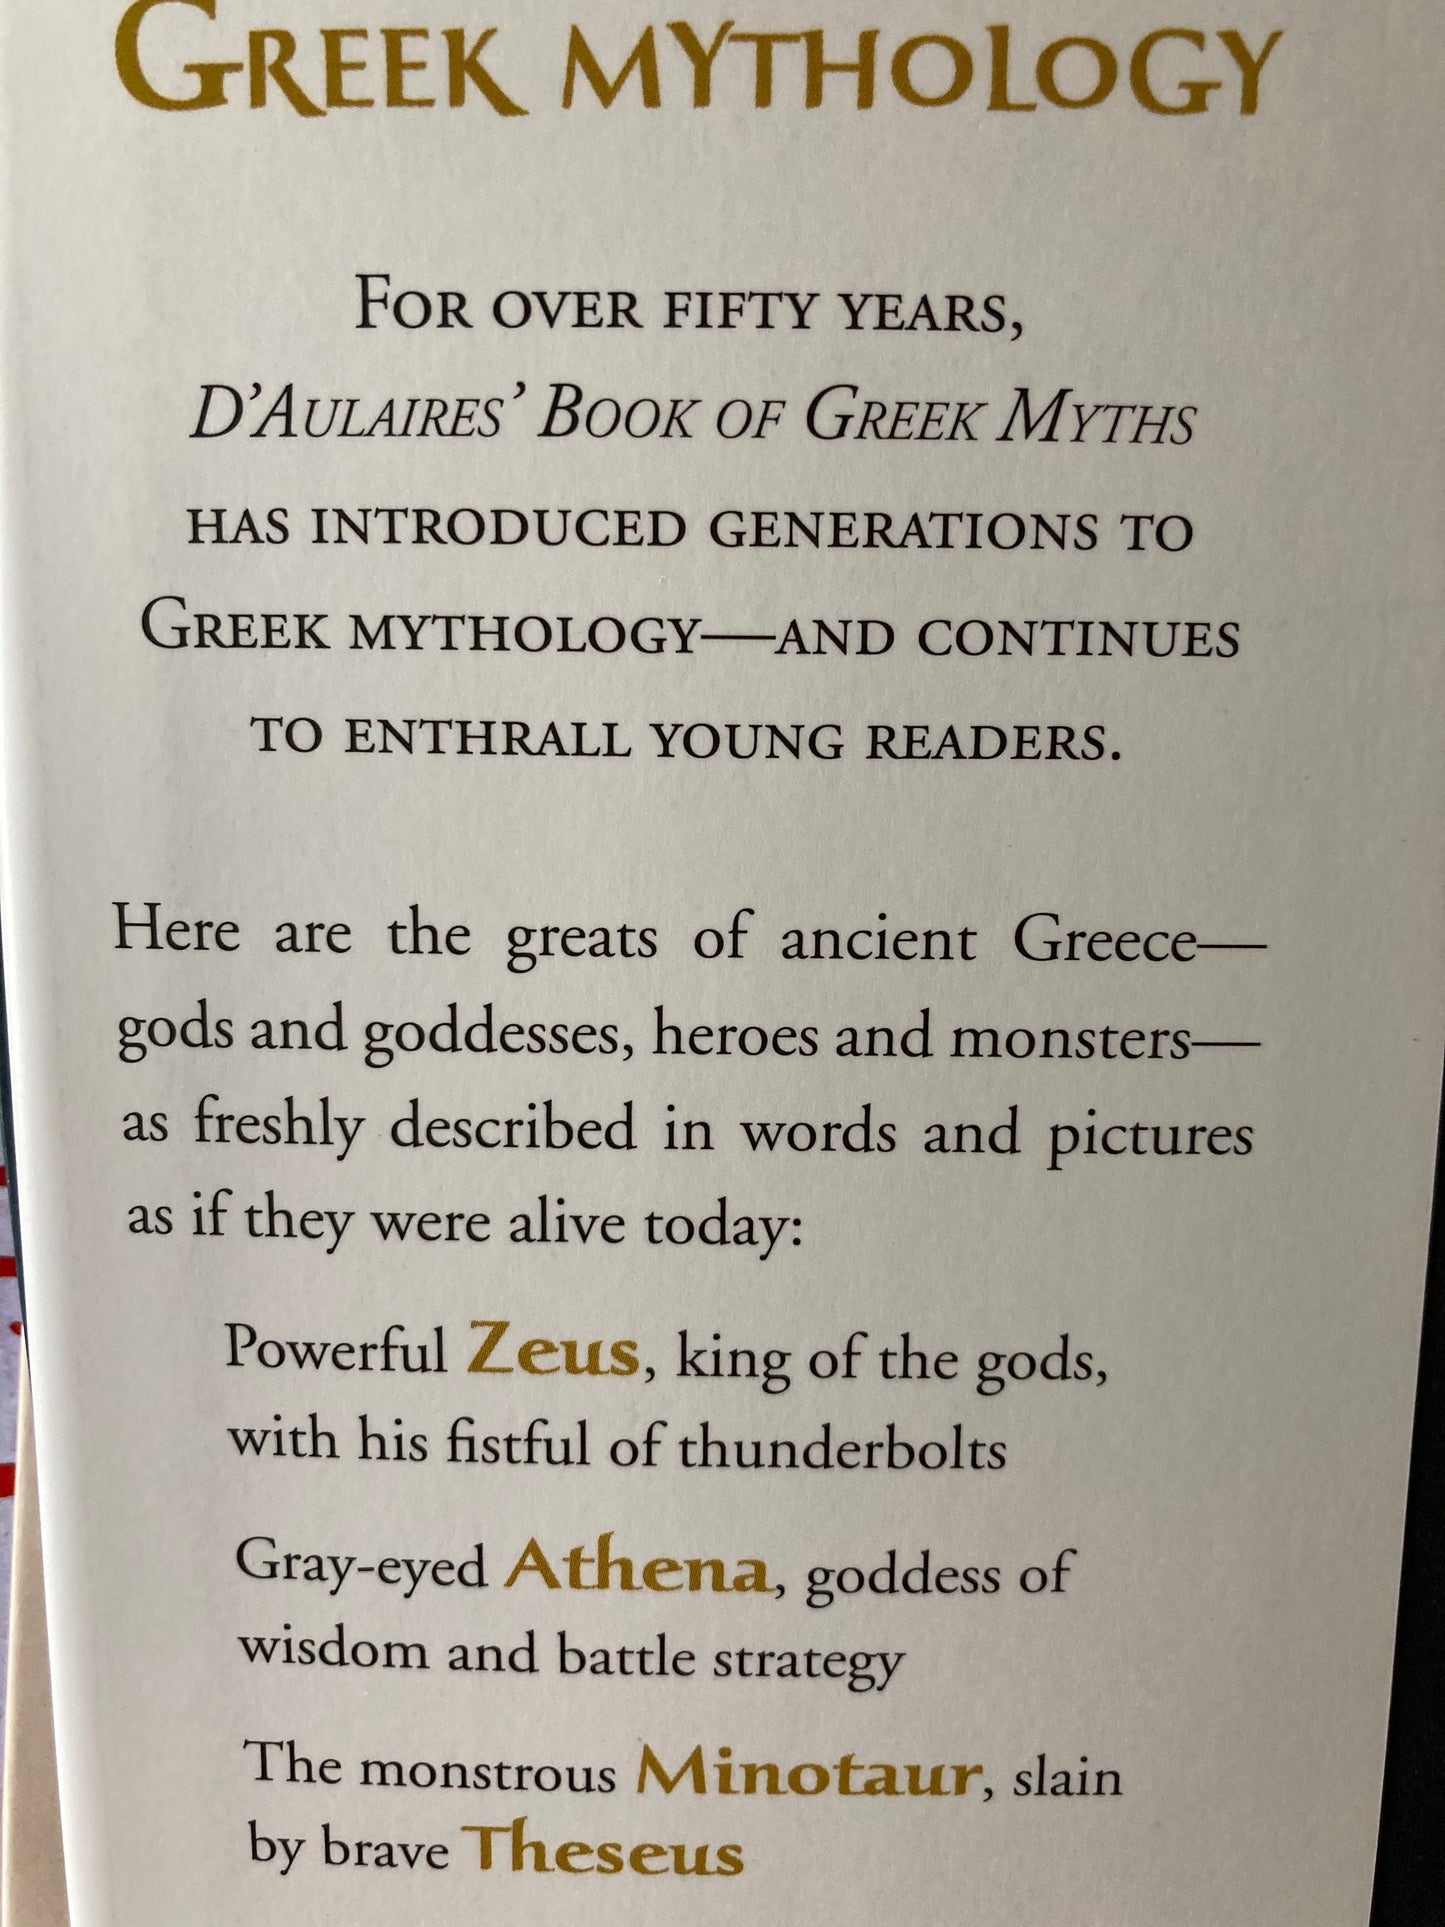 Educational Chapter Book - D'AULAIRES' BOOK OF GREEK MYTHS